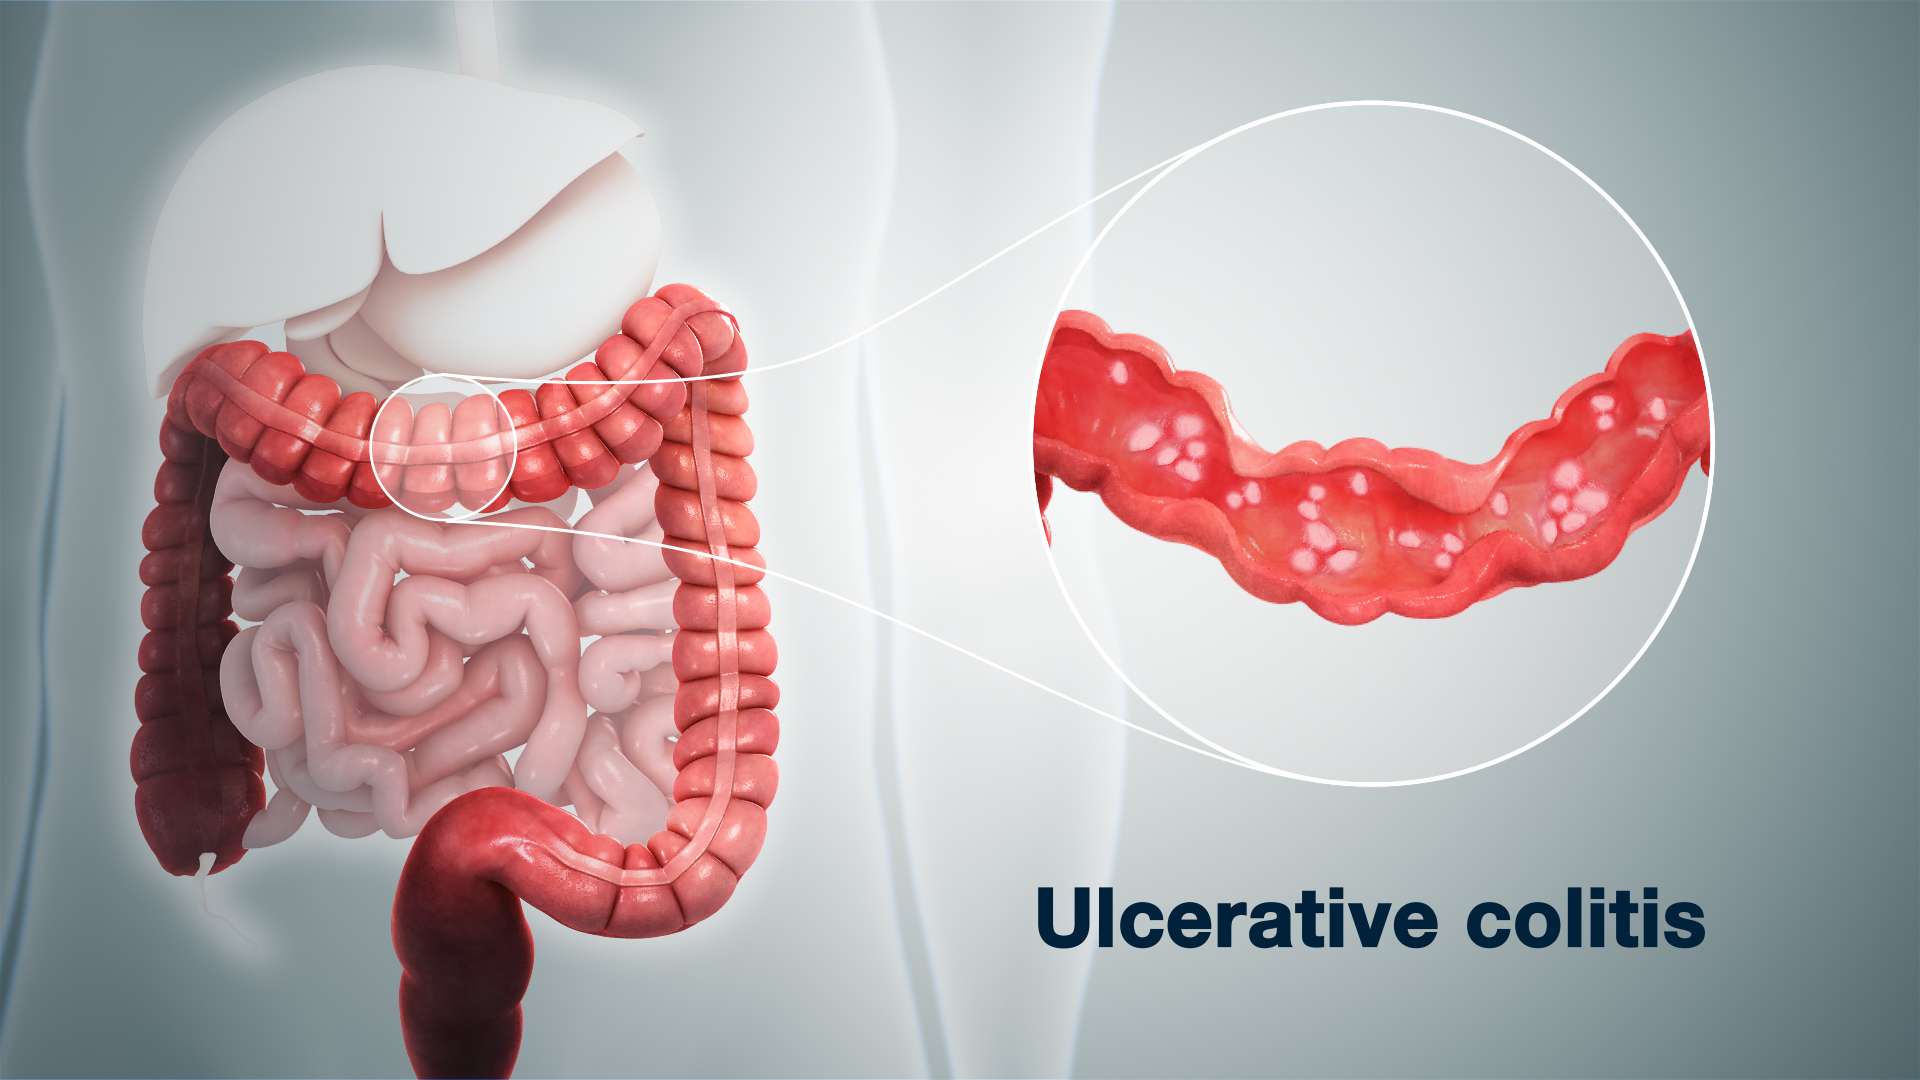 Ulcerative Colitis Causes &  Treatment depicted using 3D medical aniamion